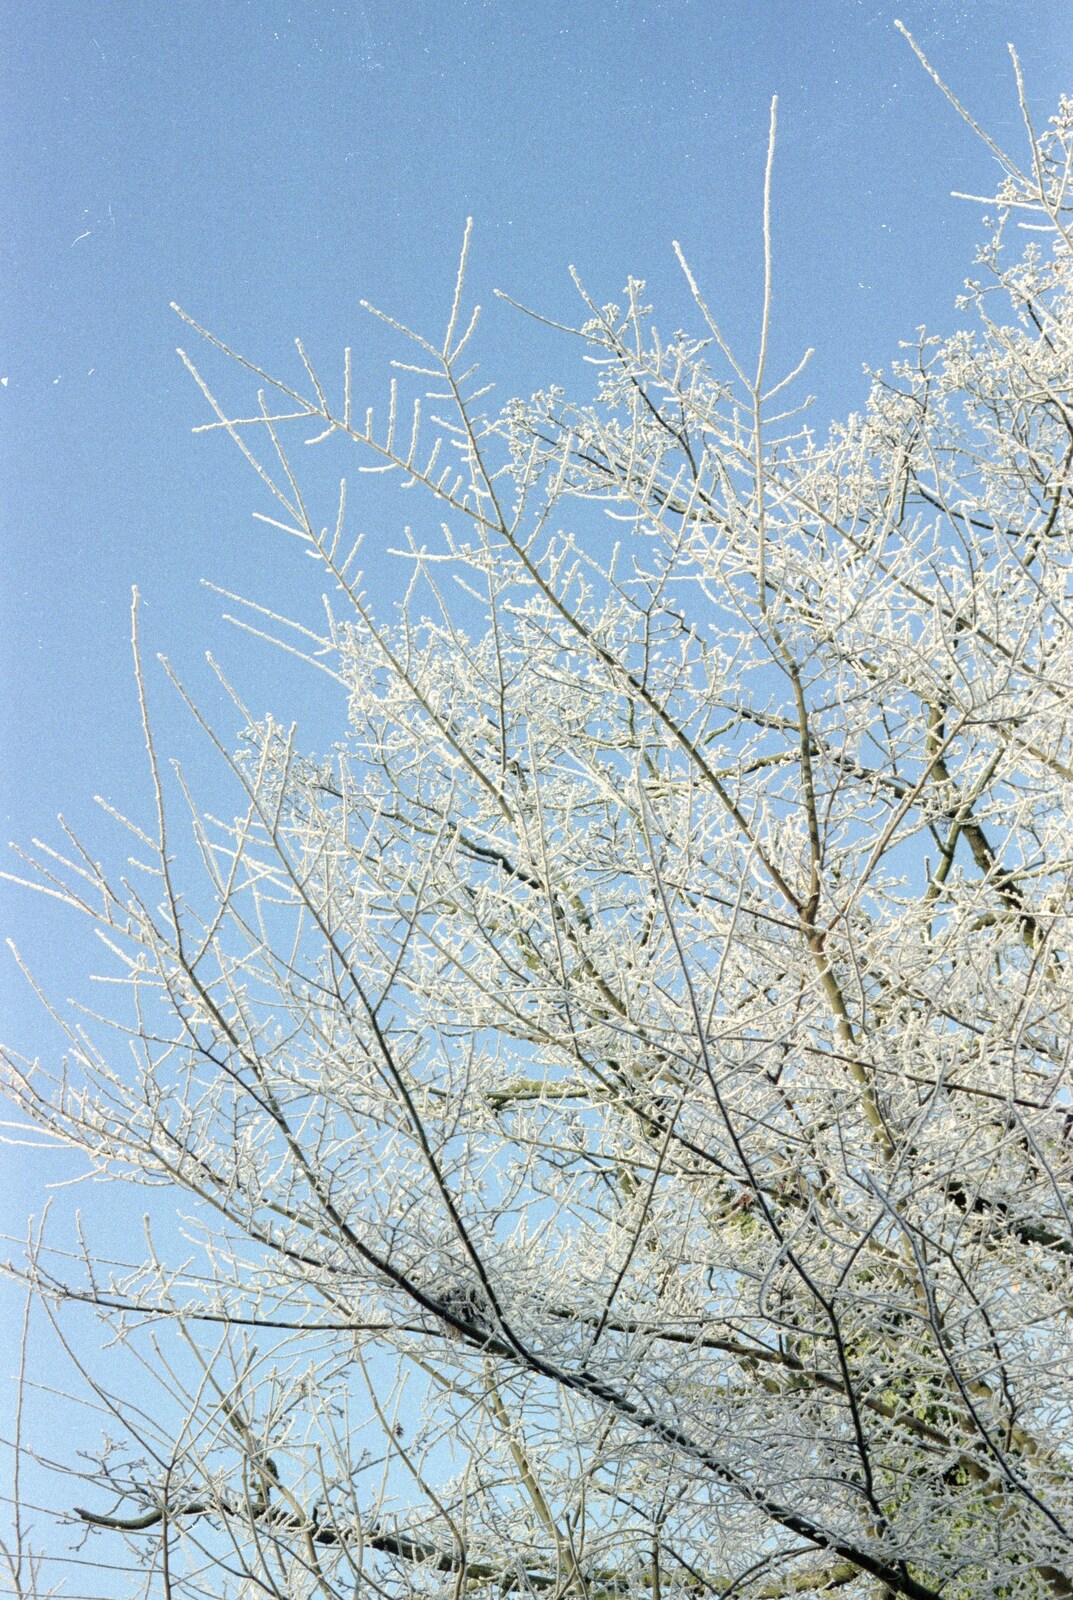 Hoar frost on a tree from A Frosty Morning, Suffolk and Norfolk - 15th December 1991